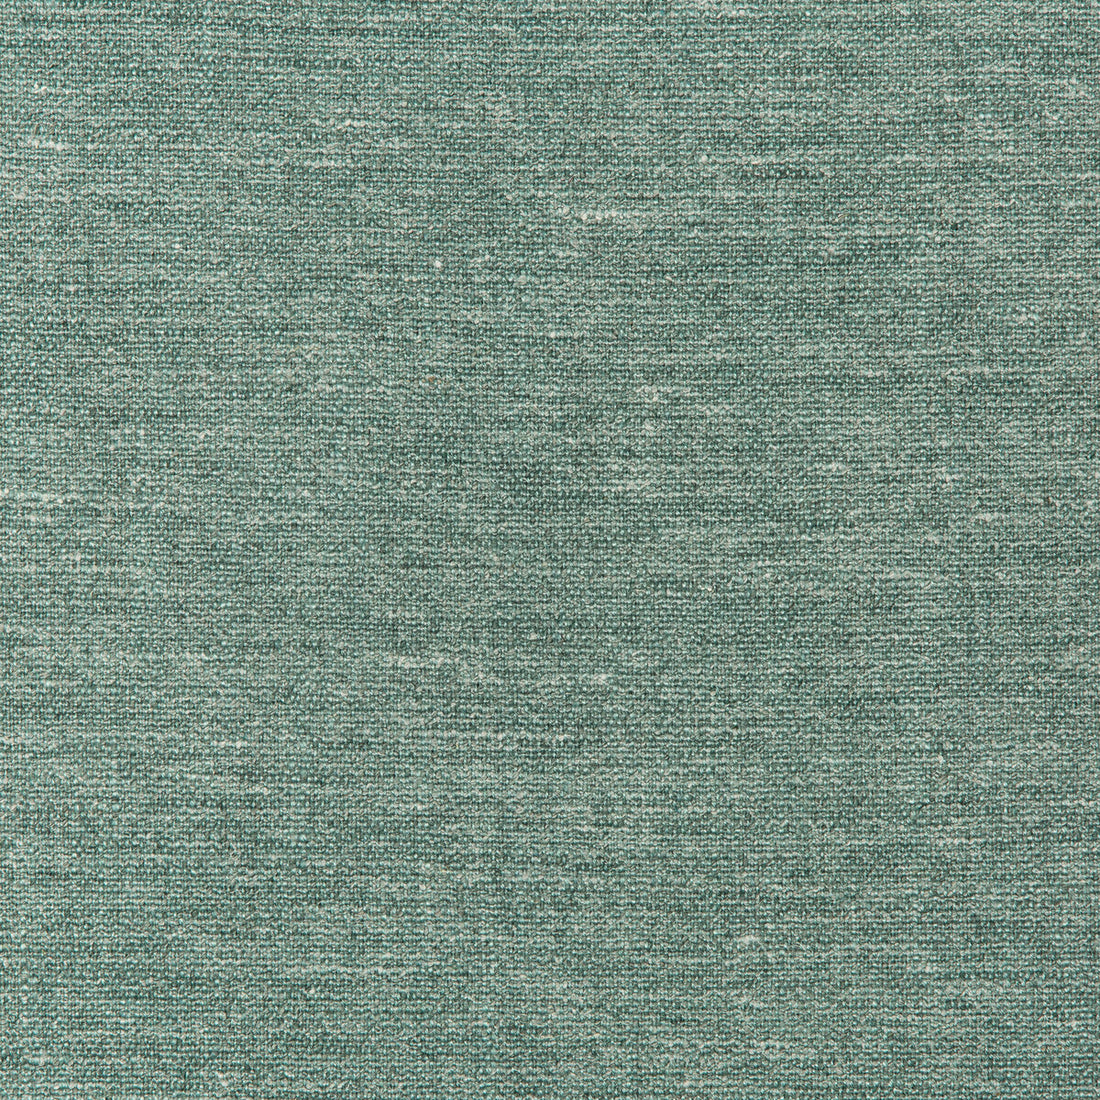 Adieu fabric in jade color - pattern 35561.23.0 - by Kravet Design in the Modern Colors-Sojourn collection